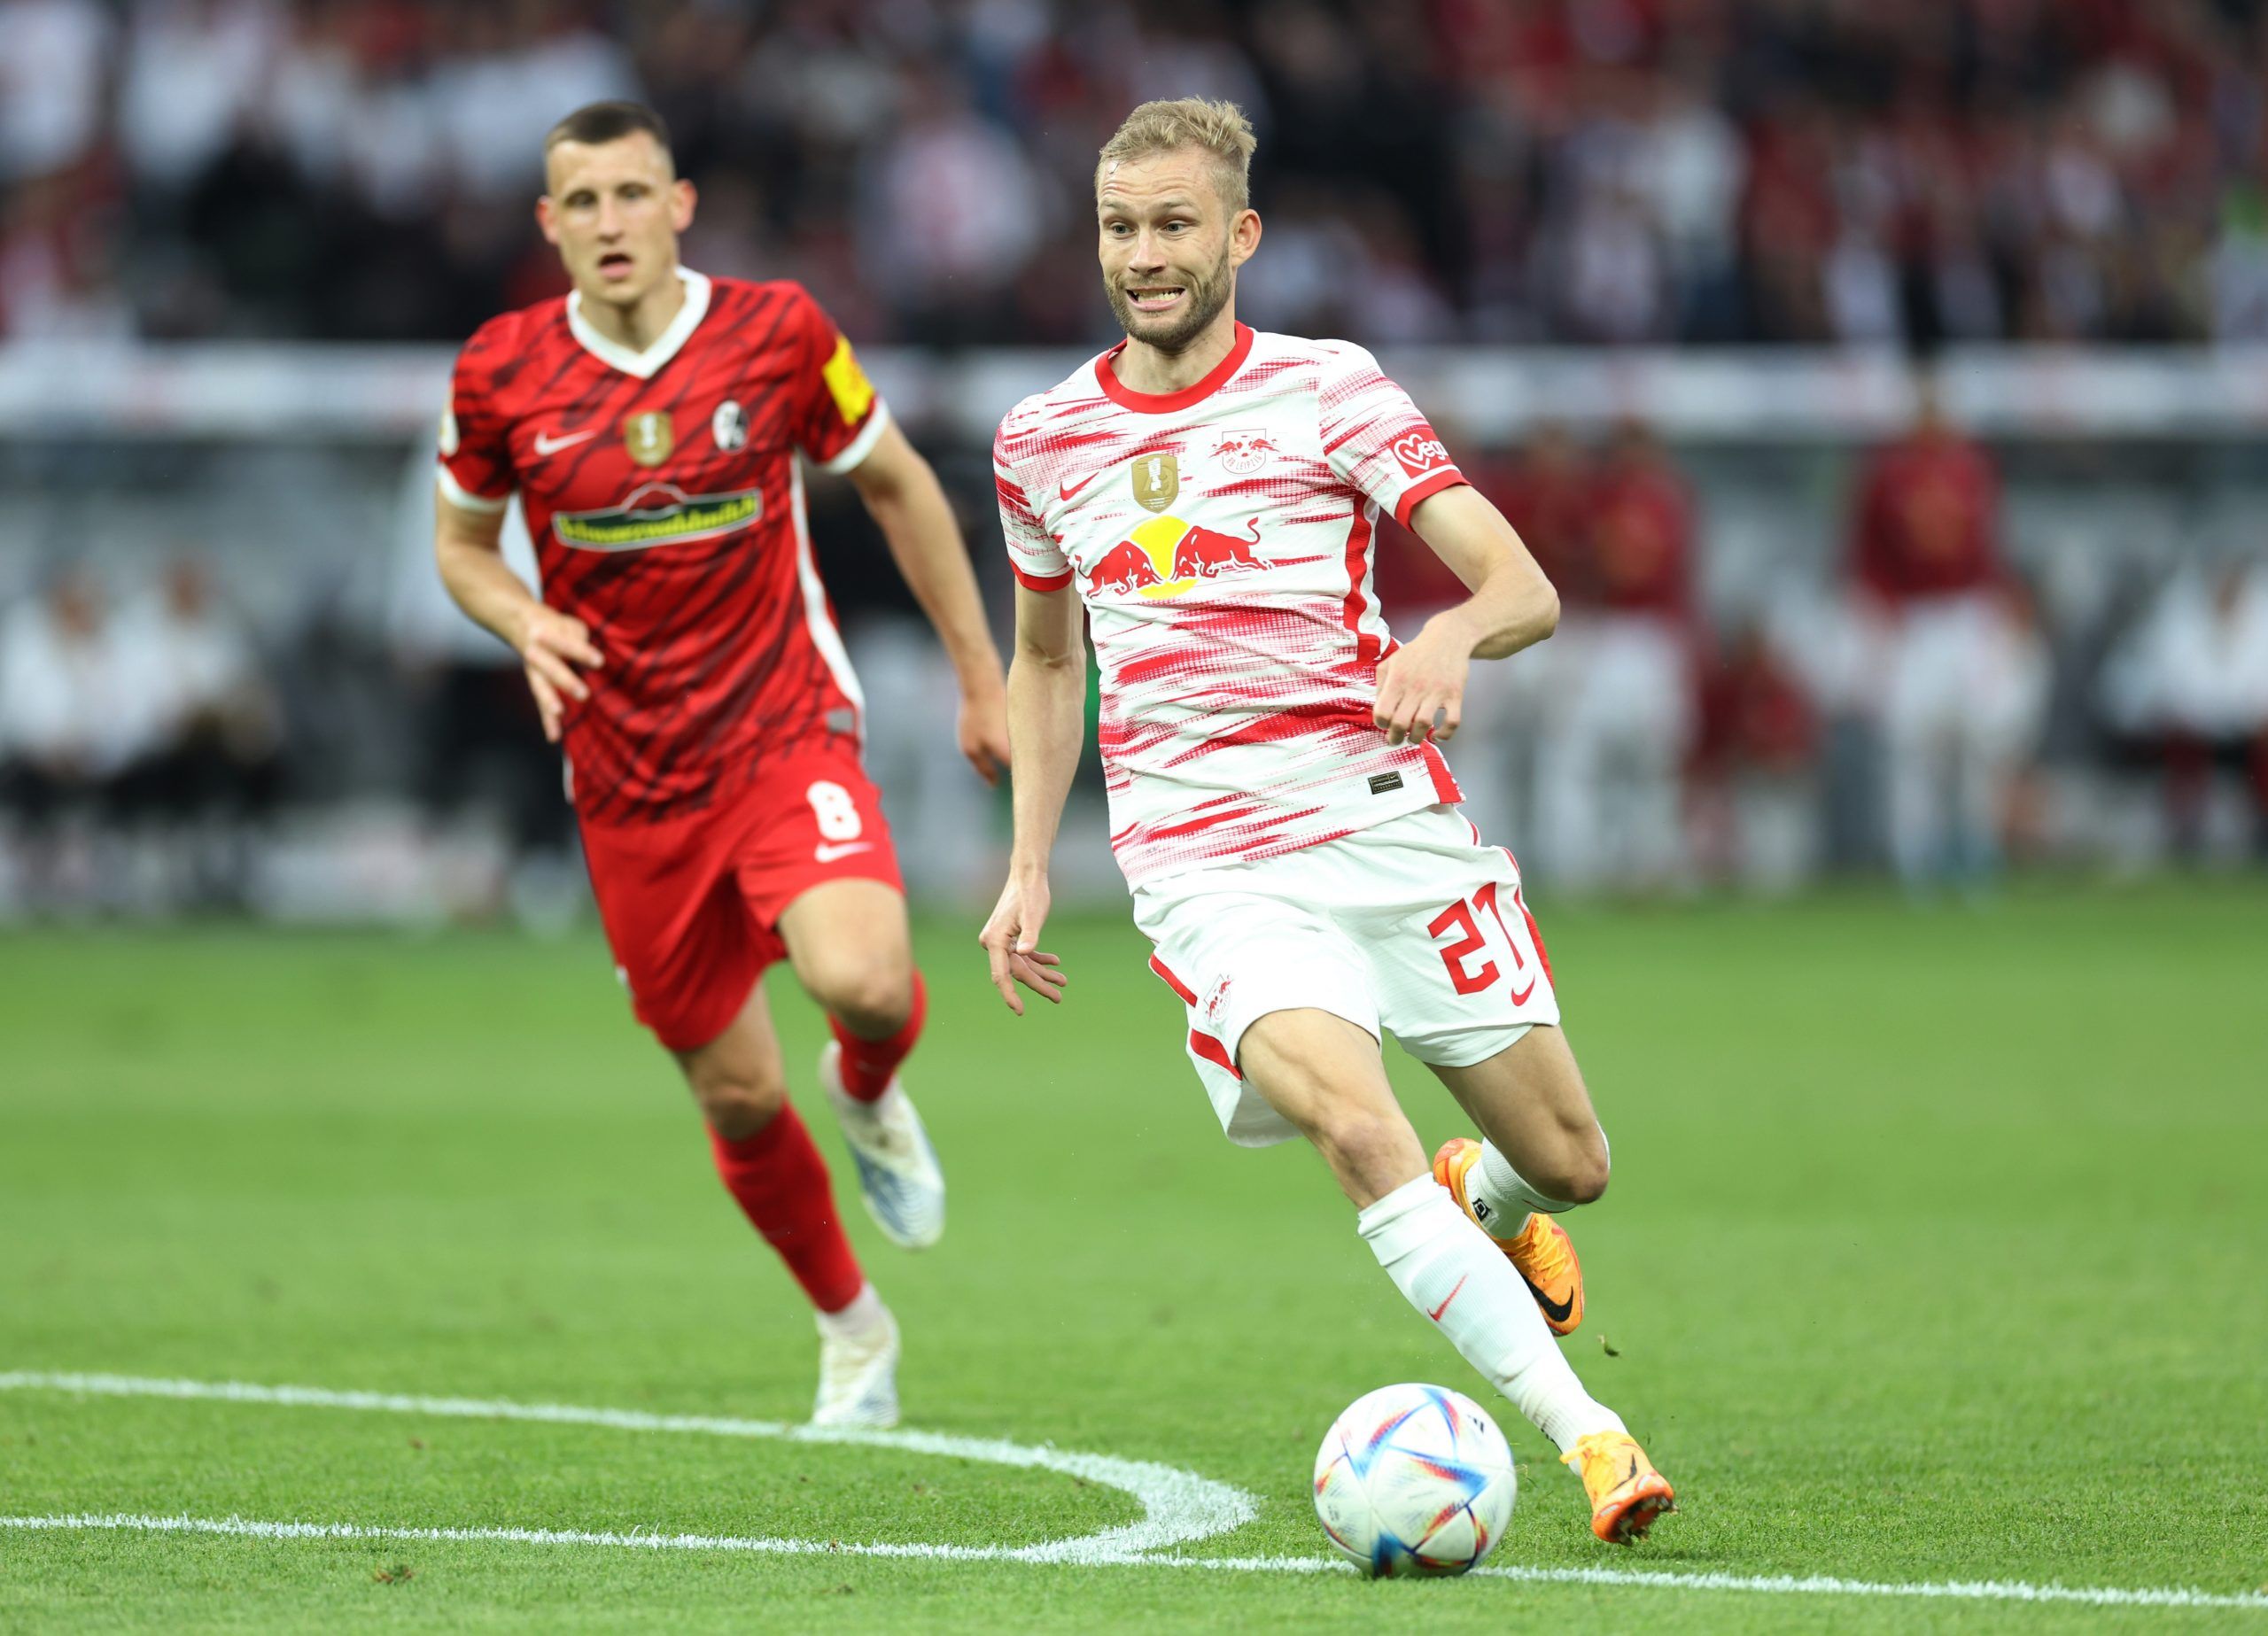 Soccer Football - DFB Cup - Final - SC Freiburg v RB Leipzig - Olympiastadion, Berlin, Germany - May 21, 2022  RB Leipzig's Konrad Laimer in action REUTERS/Leon Kuegeler DFB REGULATIONS PROHIBIT ANY USE OF PHOTOGRAPHS AS IMAGE SEQUENCES AND/OR QUASI-VIDEO.